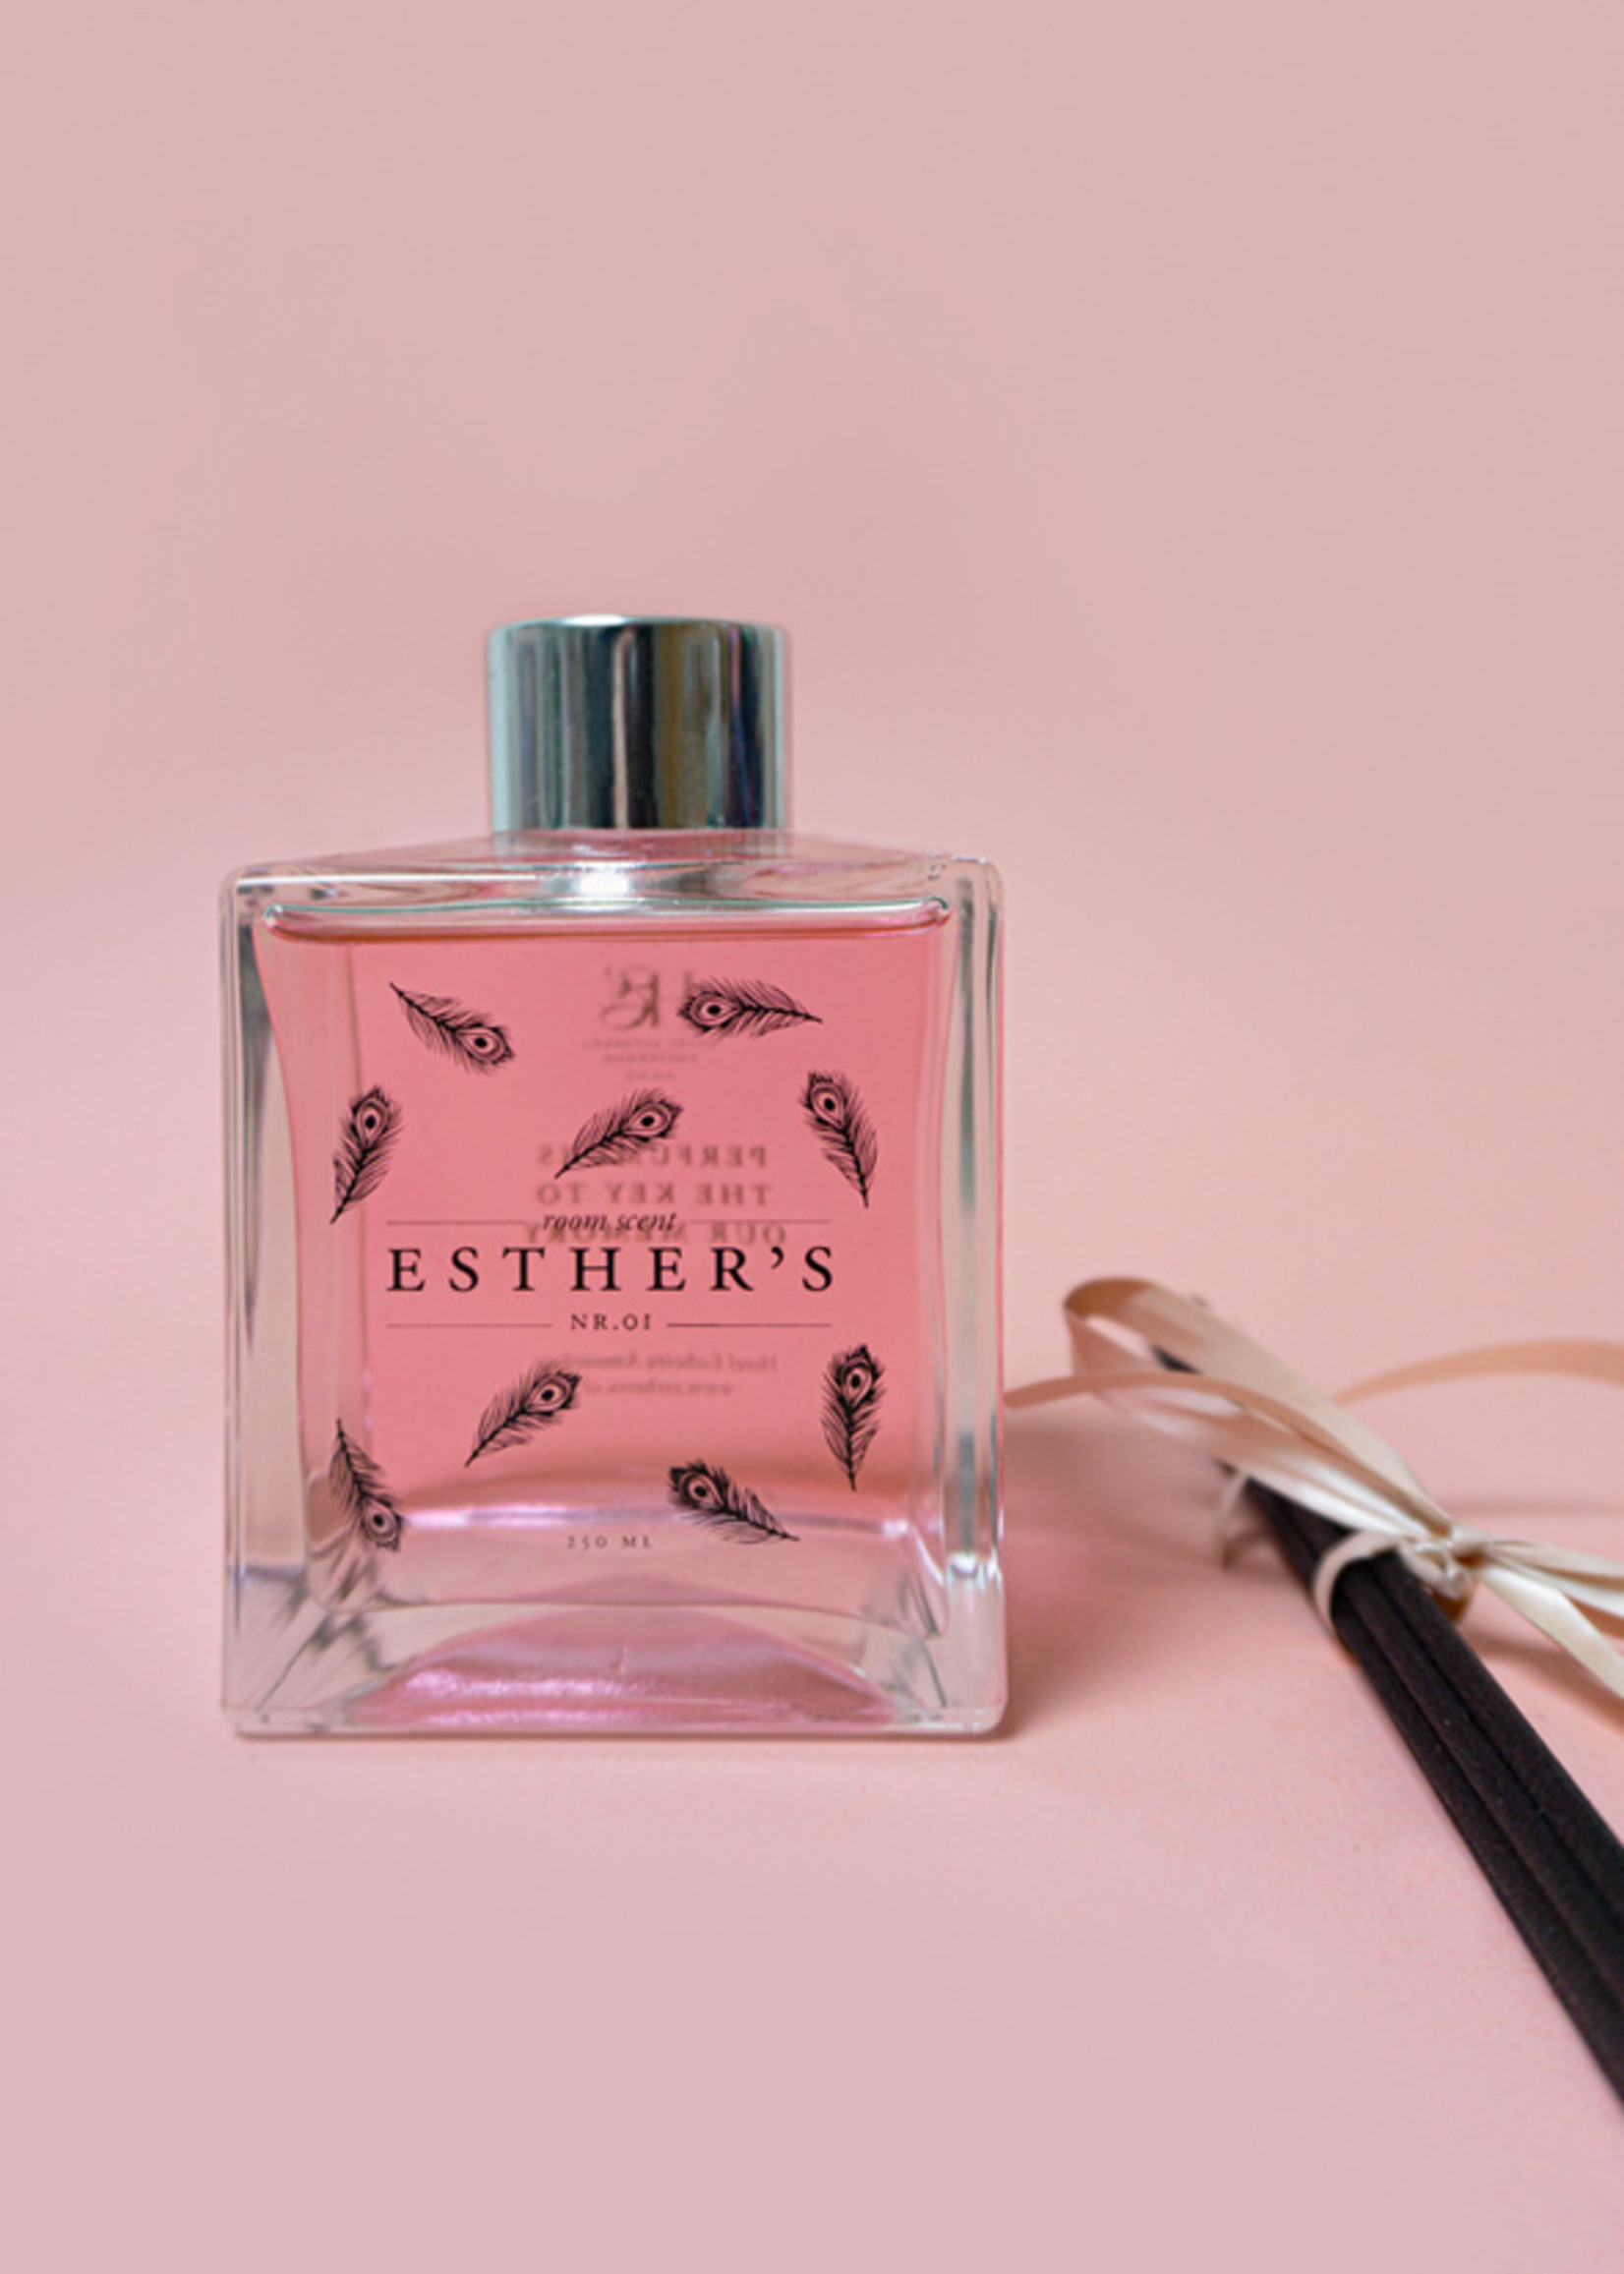 Esther's Esther's no. 01 Room diffuser